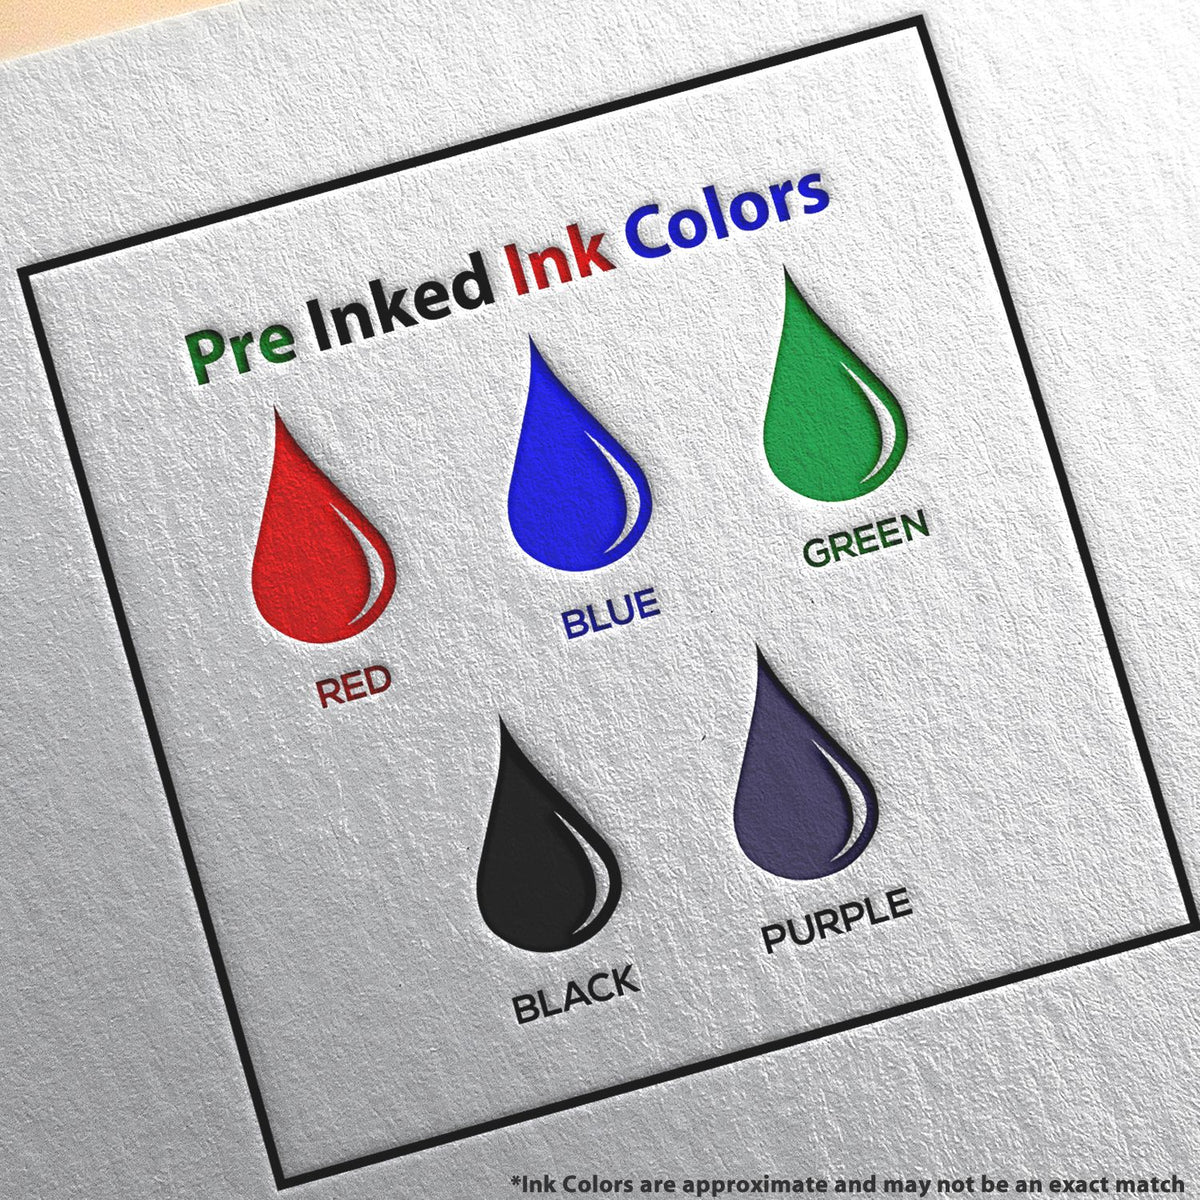 A picture showing the different ink colors or hues available for the Slim Pre-Inked Oklahoma Land Surveyor Seal Stamp product.